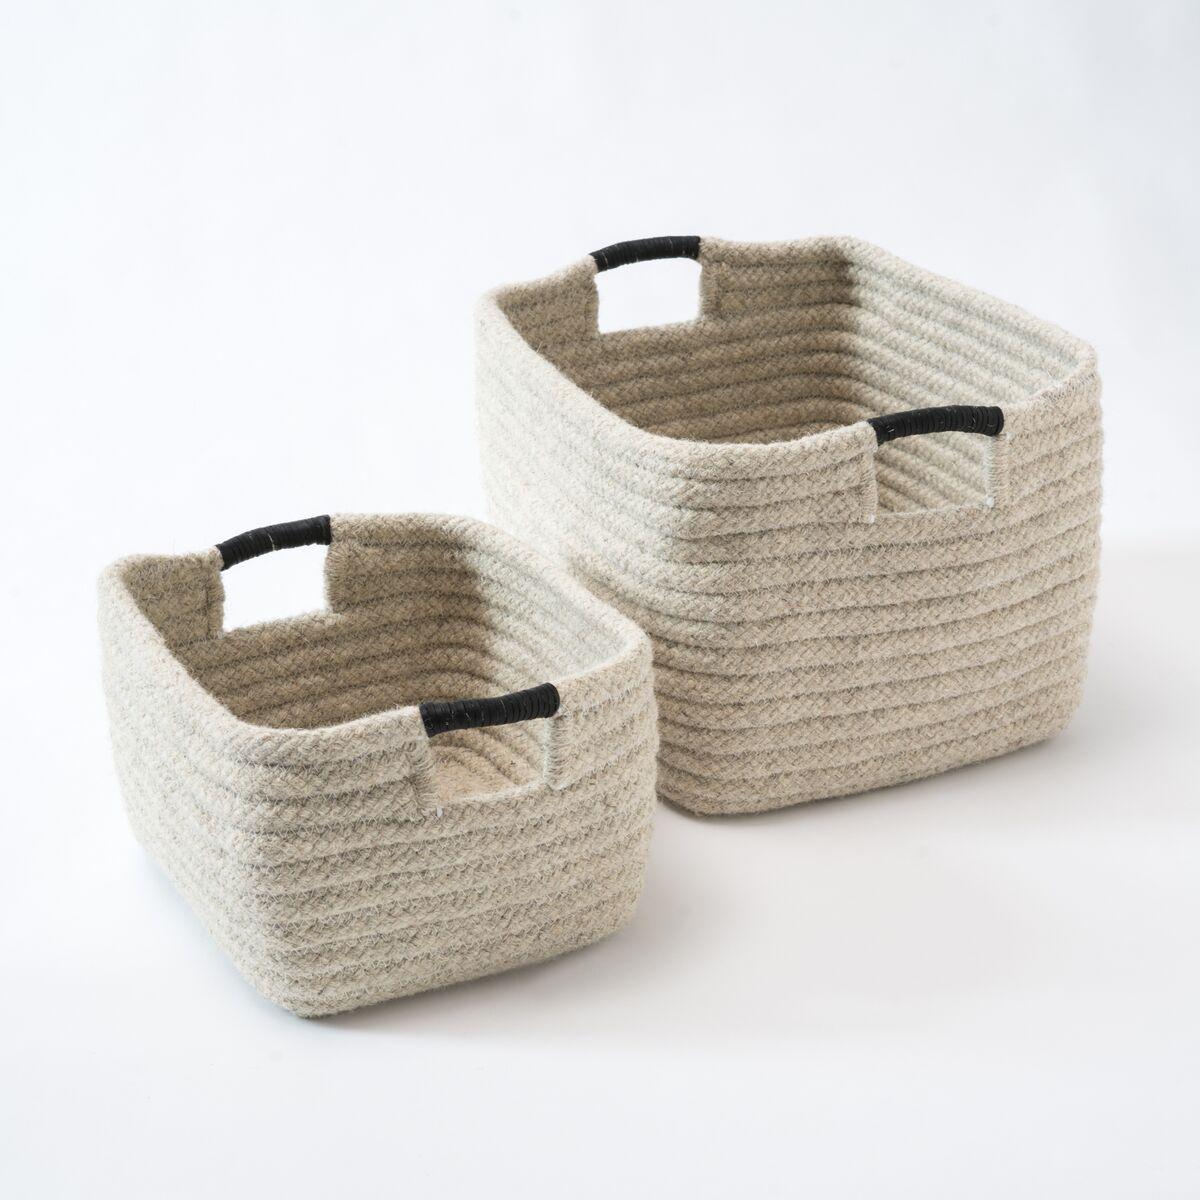 Organic Modern Natural Wool Basket in Light Grey, Leather Wrap Handles, Custom Crafted in USA